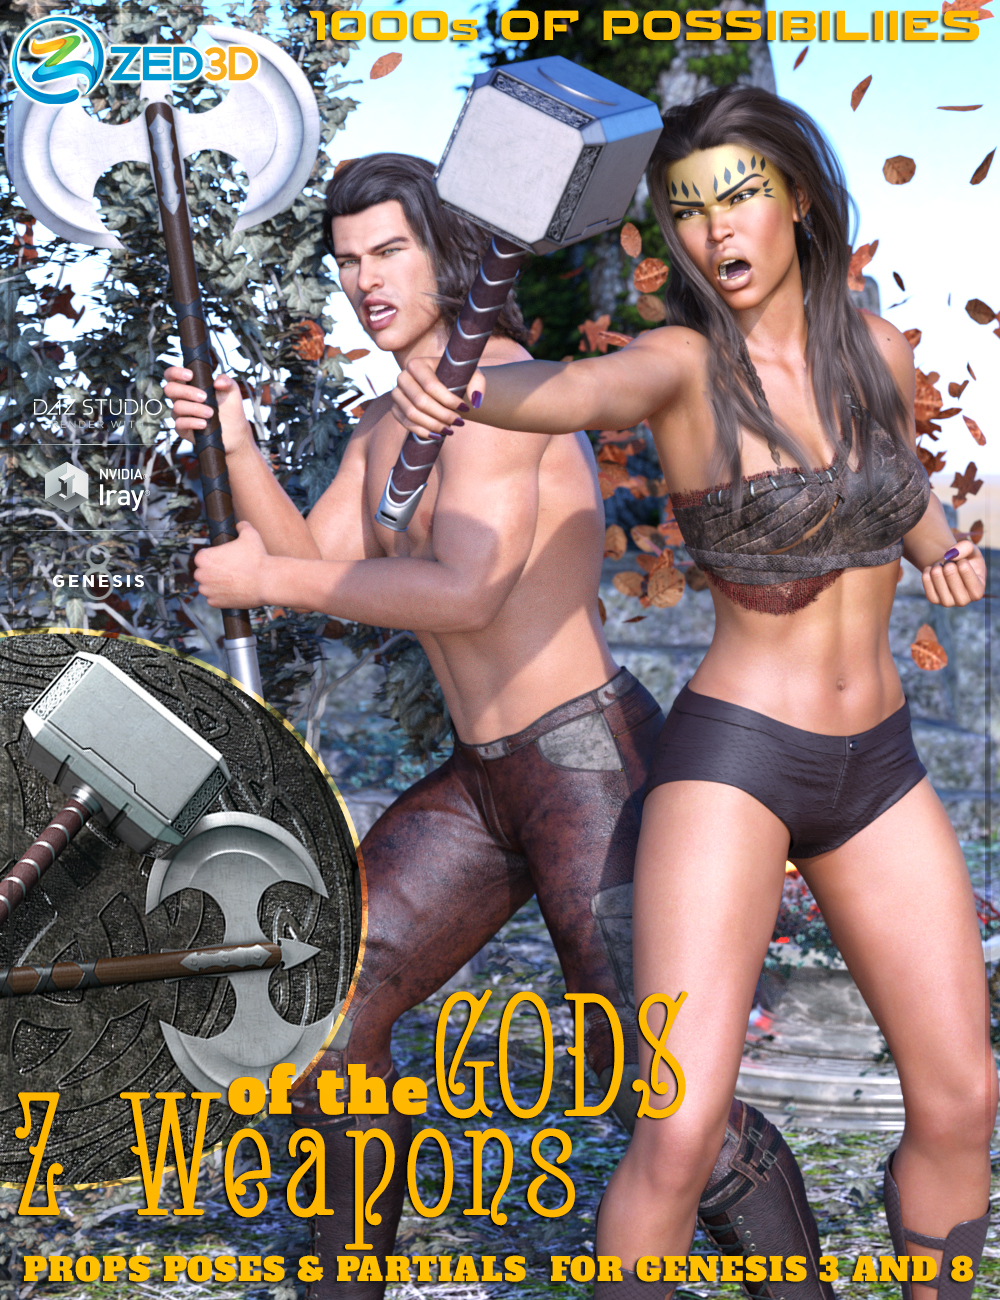 Z Weapons of the Gods and Poses for Genesis 3 and 8 by: Zeddicuss, 3D Models by Daz 3D